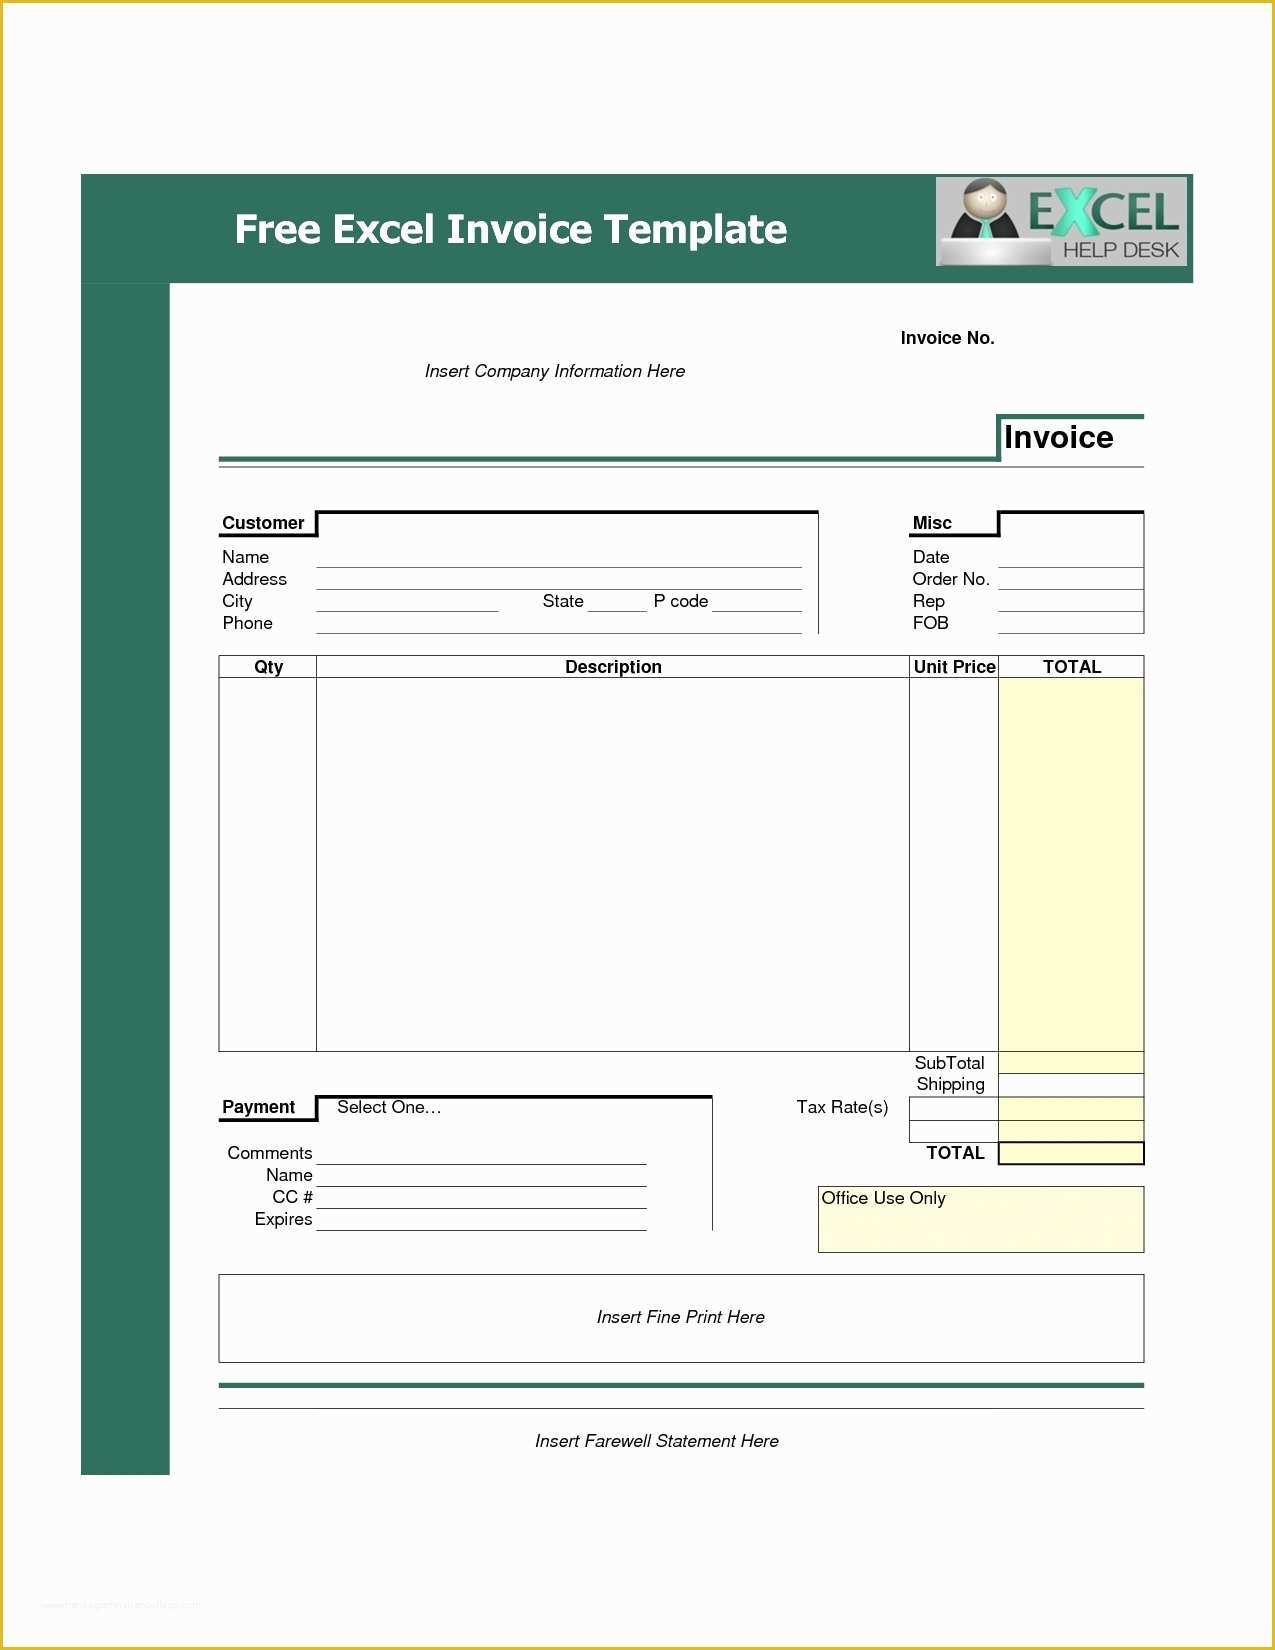 Free Invoice Template Excel Of Invoice Template Free Download Excel Invoice Template Ideas